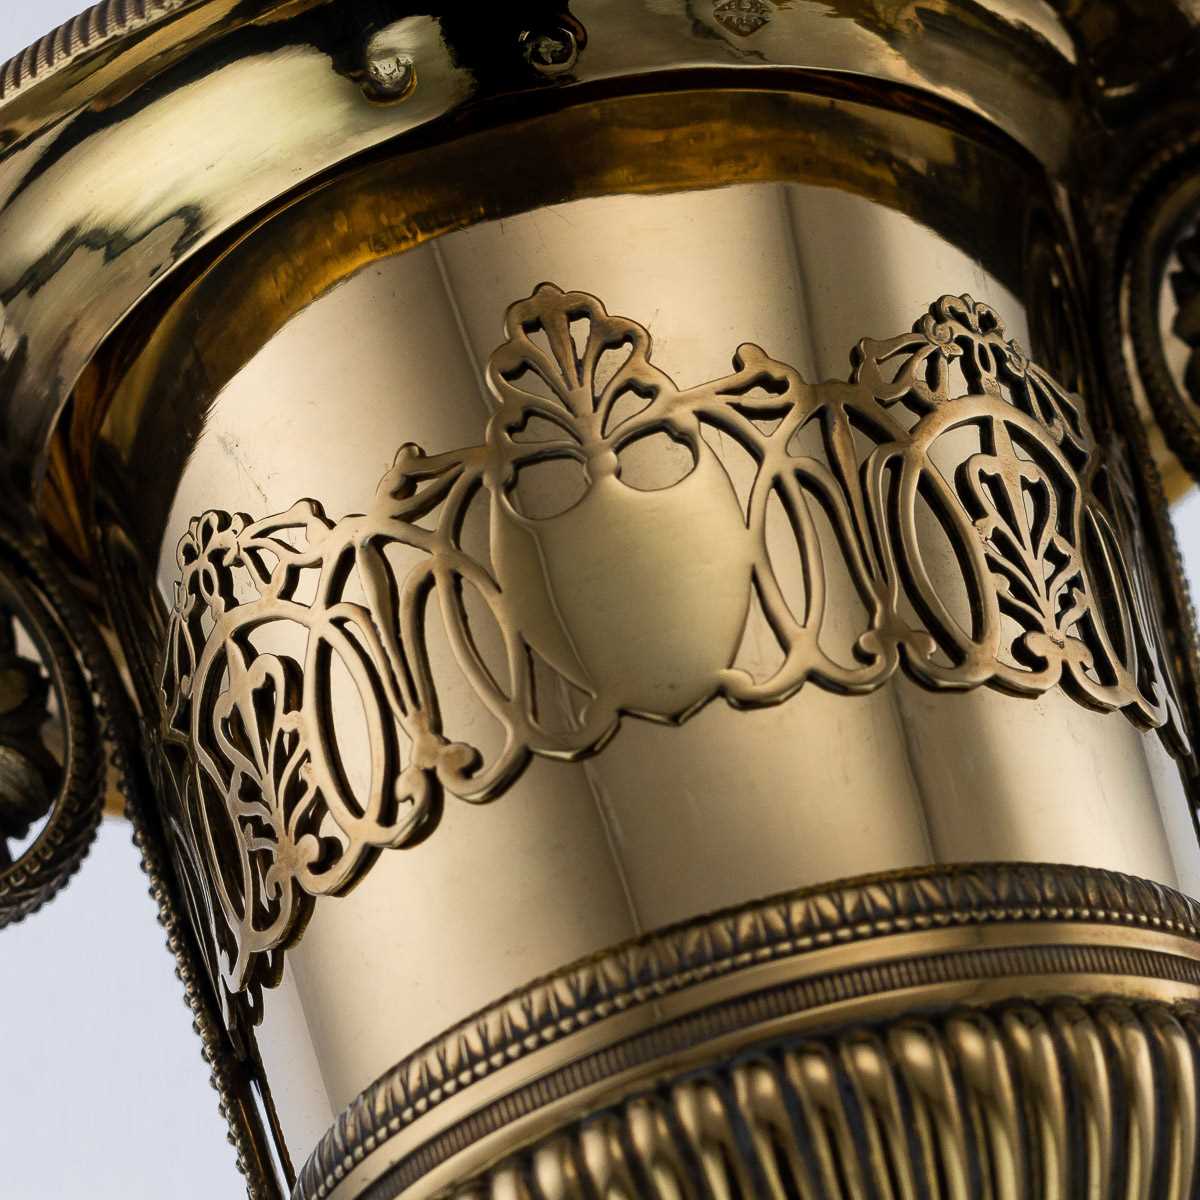 AN EARLY 19TH CENTURY SILVER GILT URN BY MARC JACQUART, PARIS - Image 7 of 19